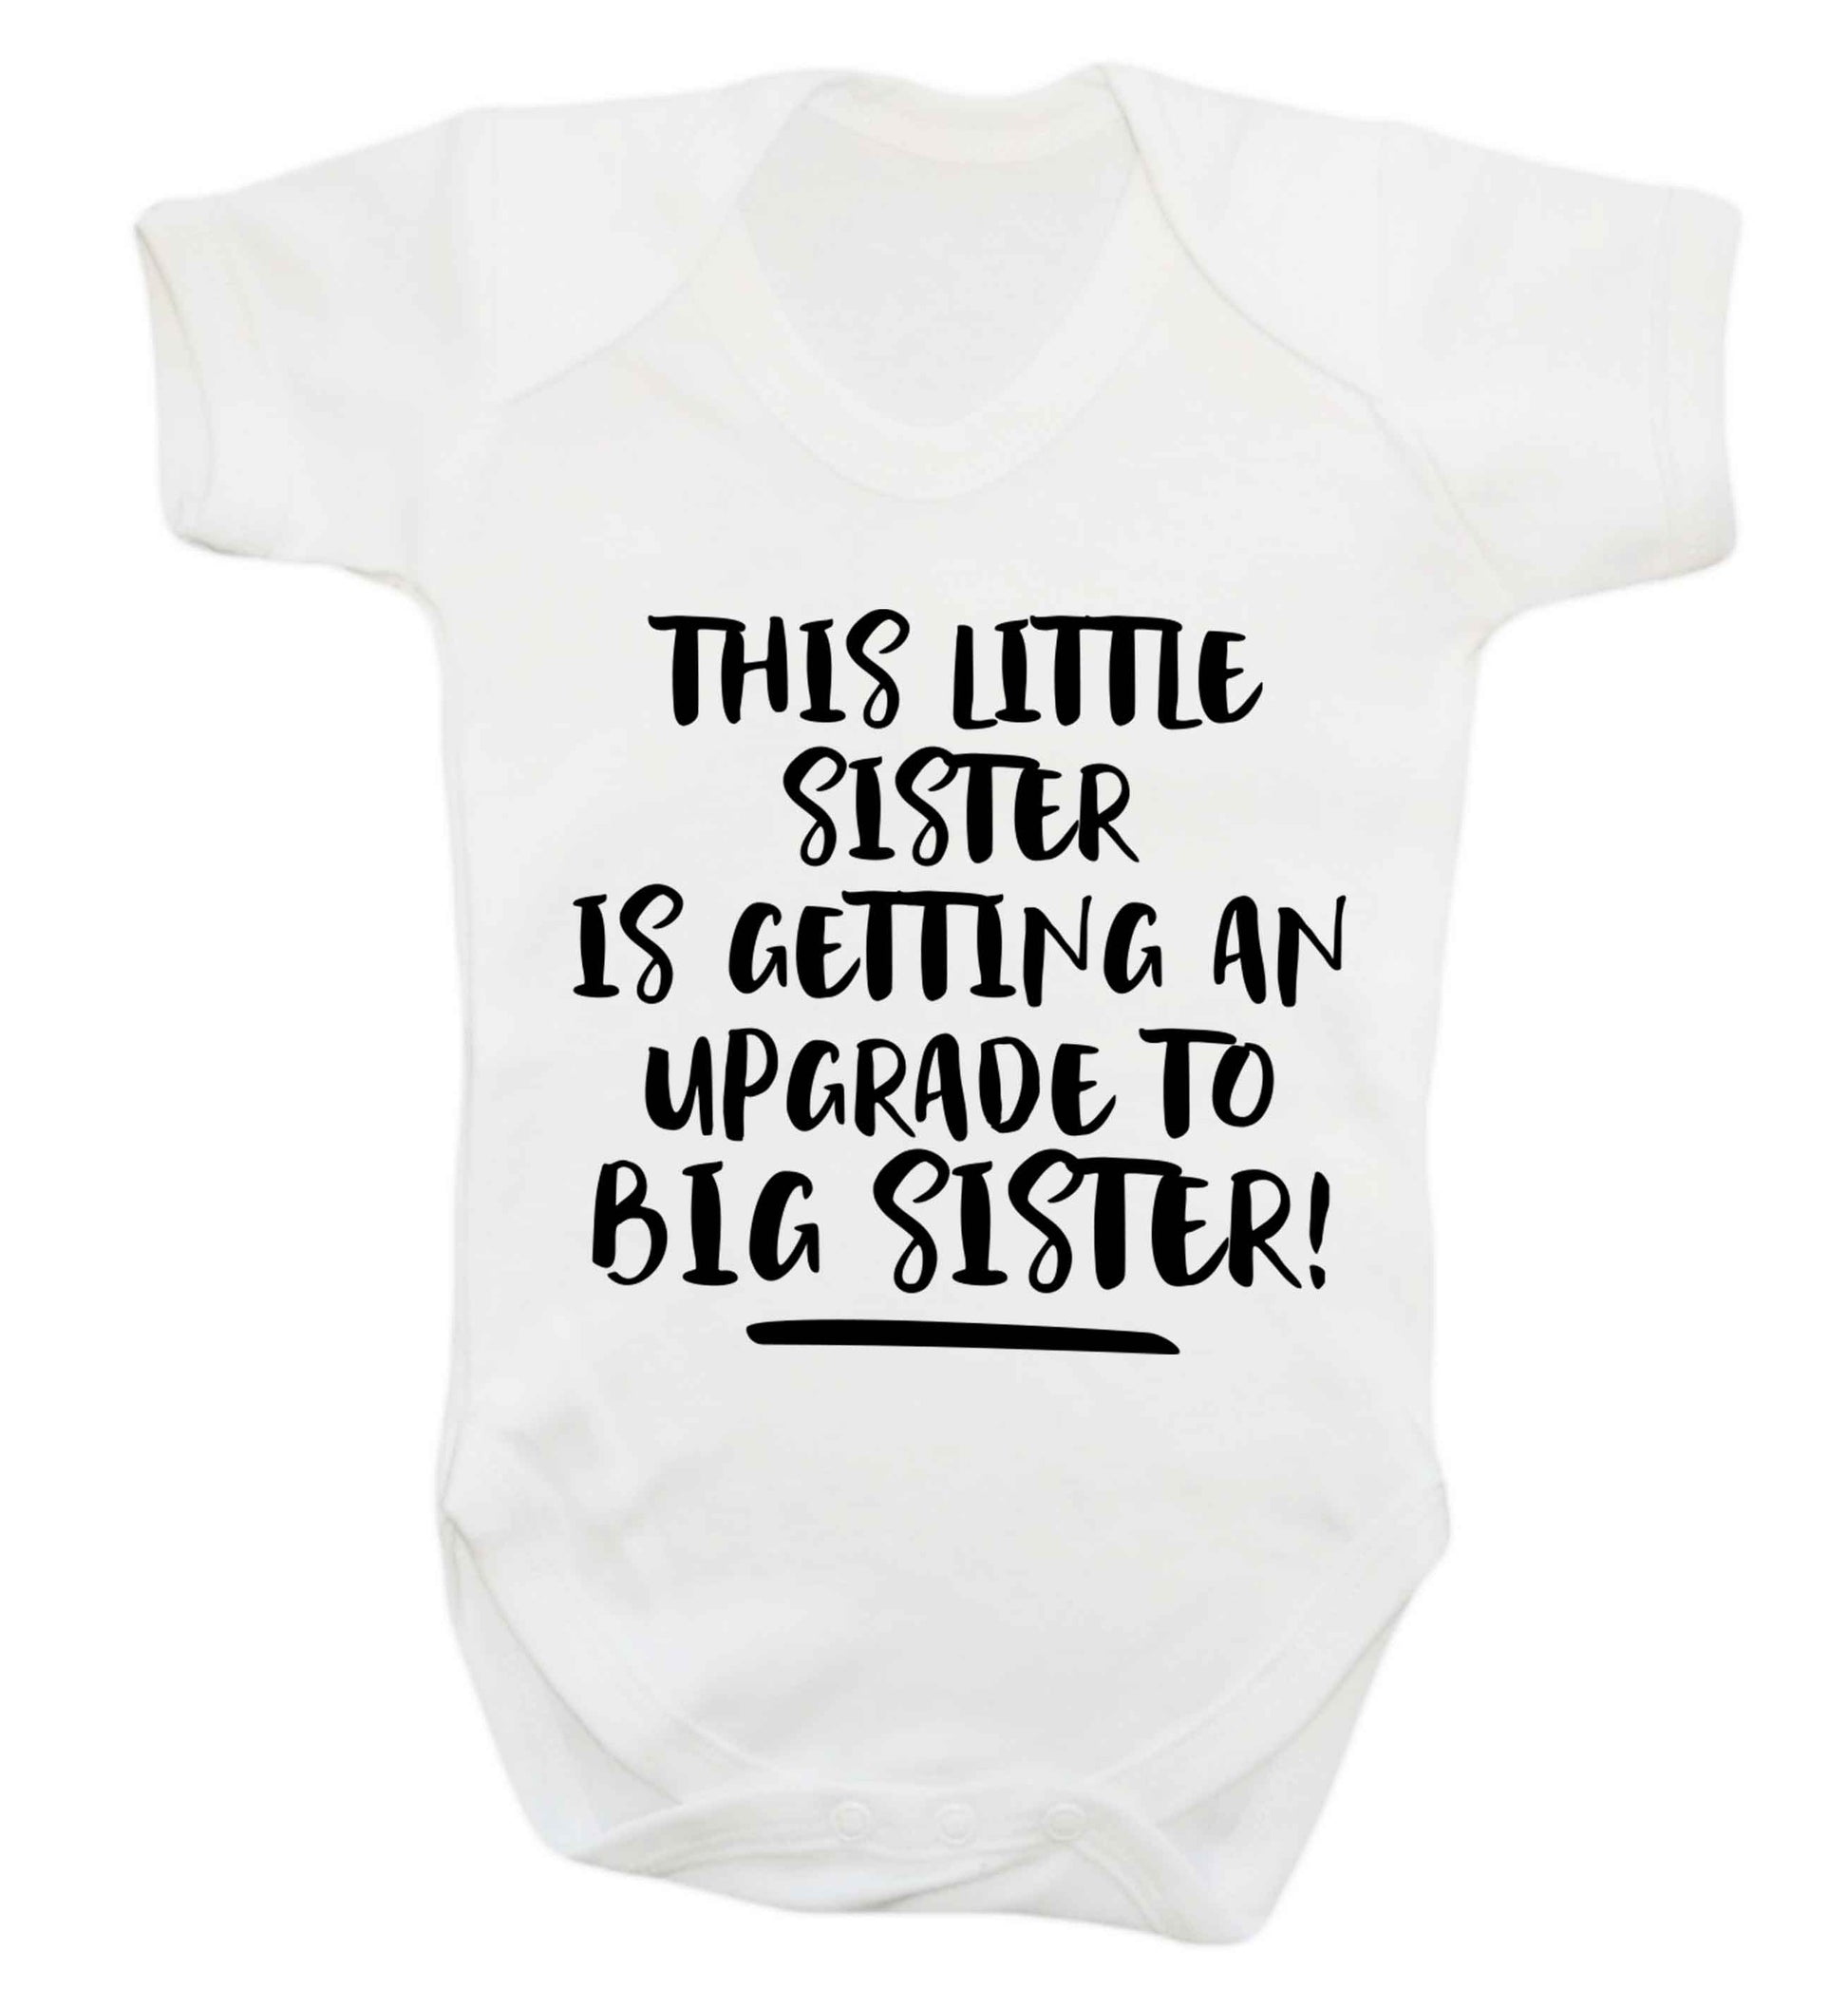 This little sister is getting an upgrade to big sister! Baby Vest white 18-24 months